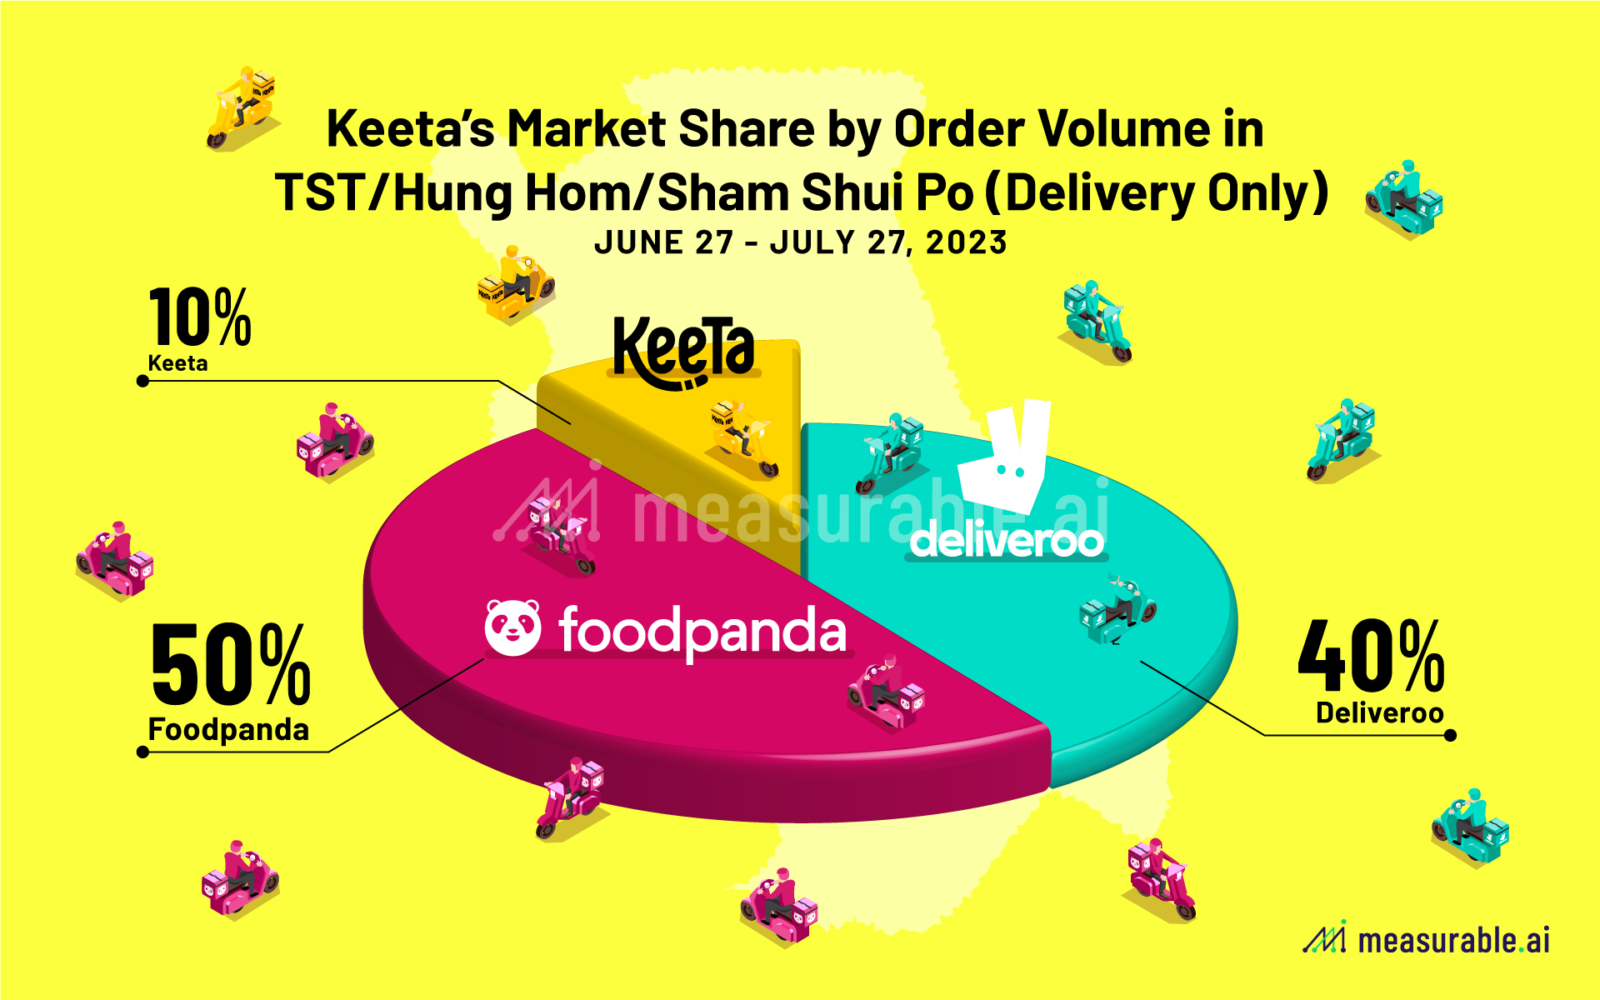 KeeTa's Market Share by Order Volume in TST/Hung Hom/Sham Shui Po (Delivery Only)